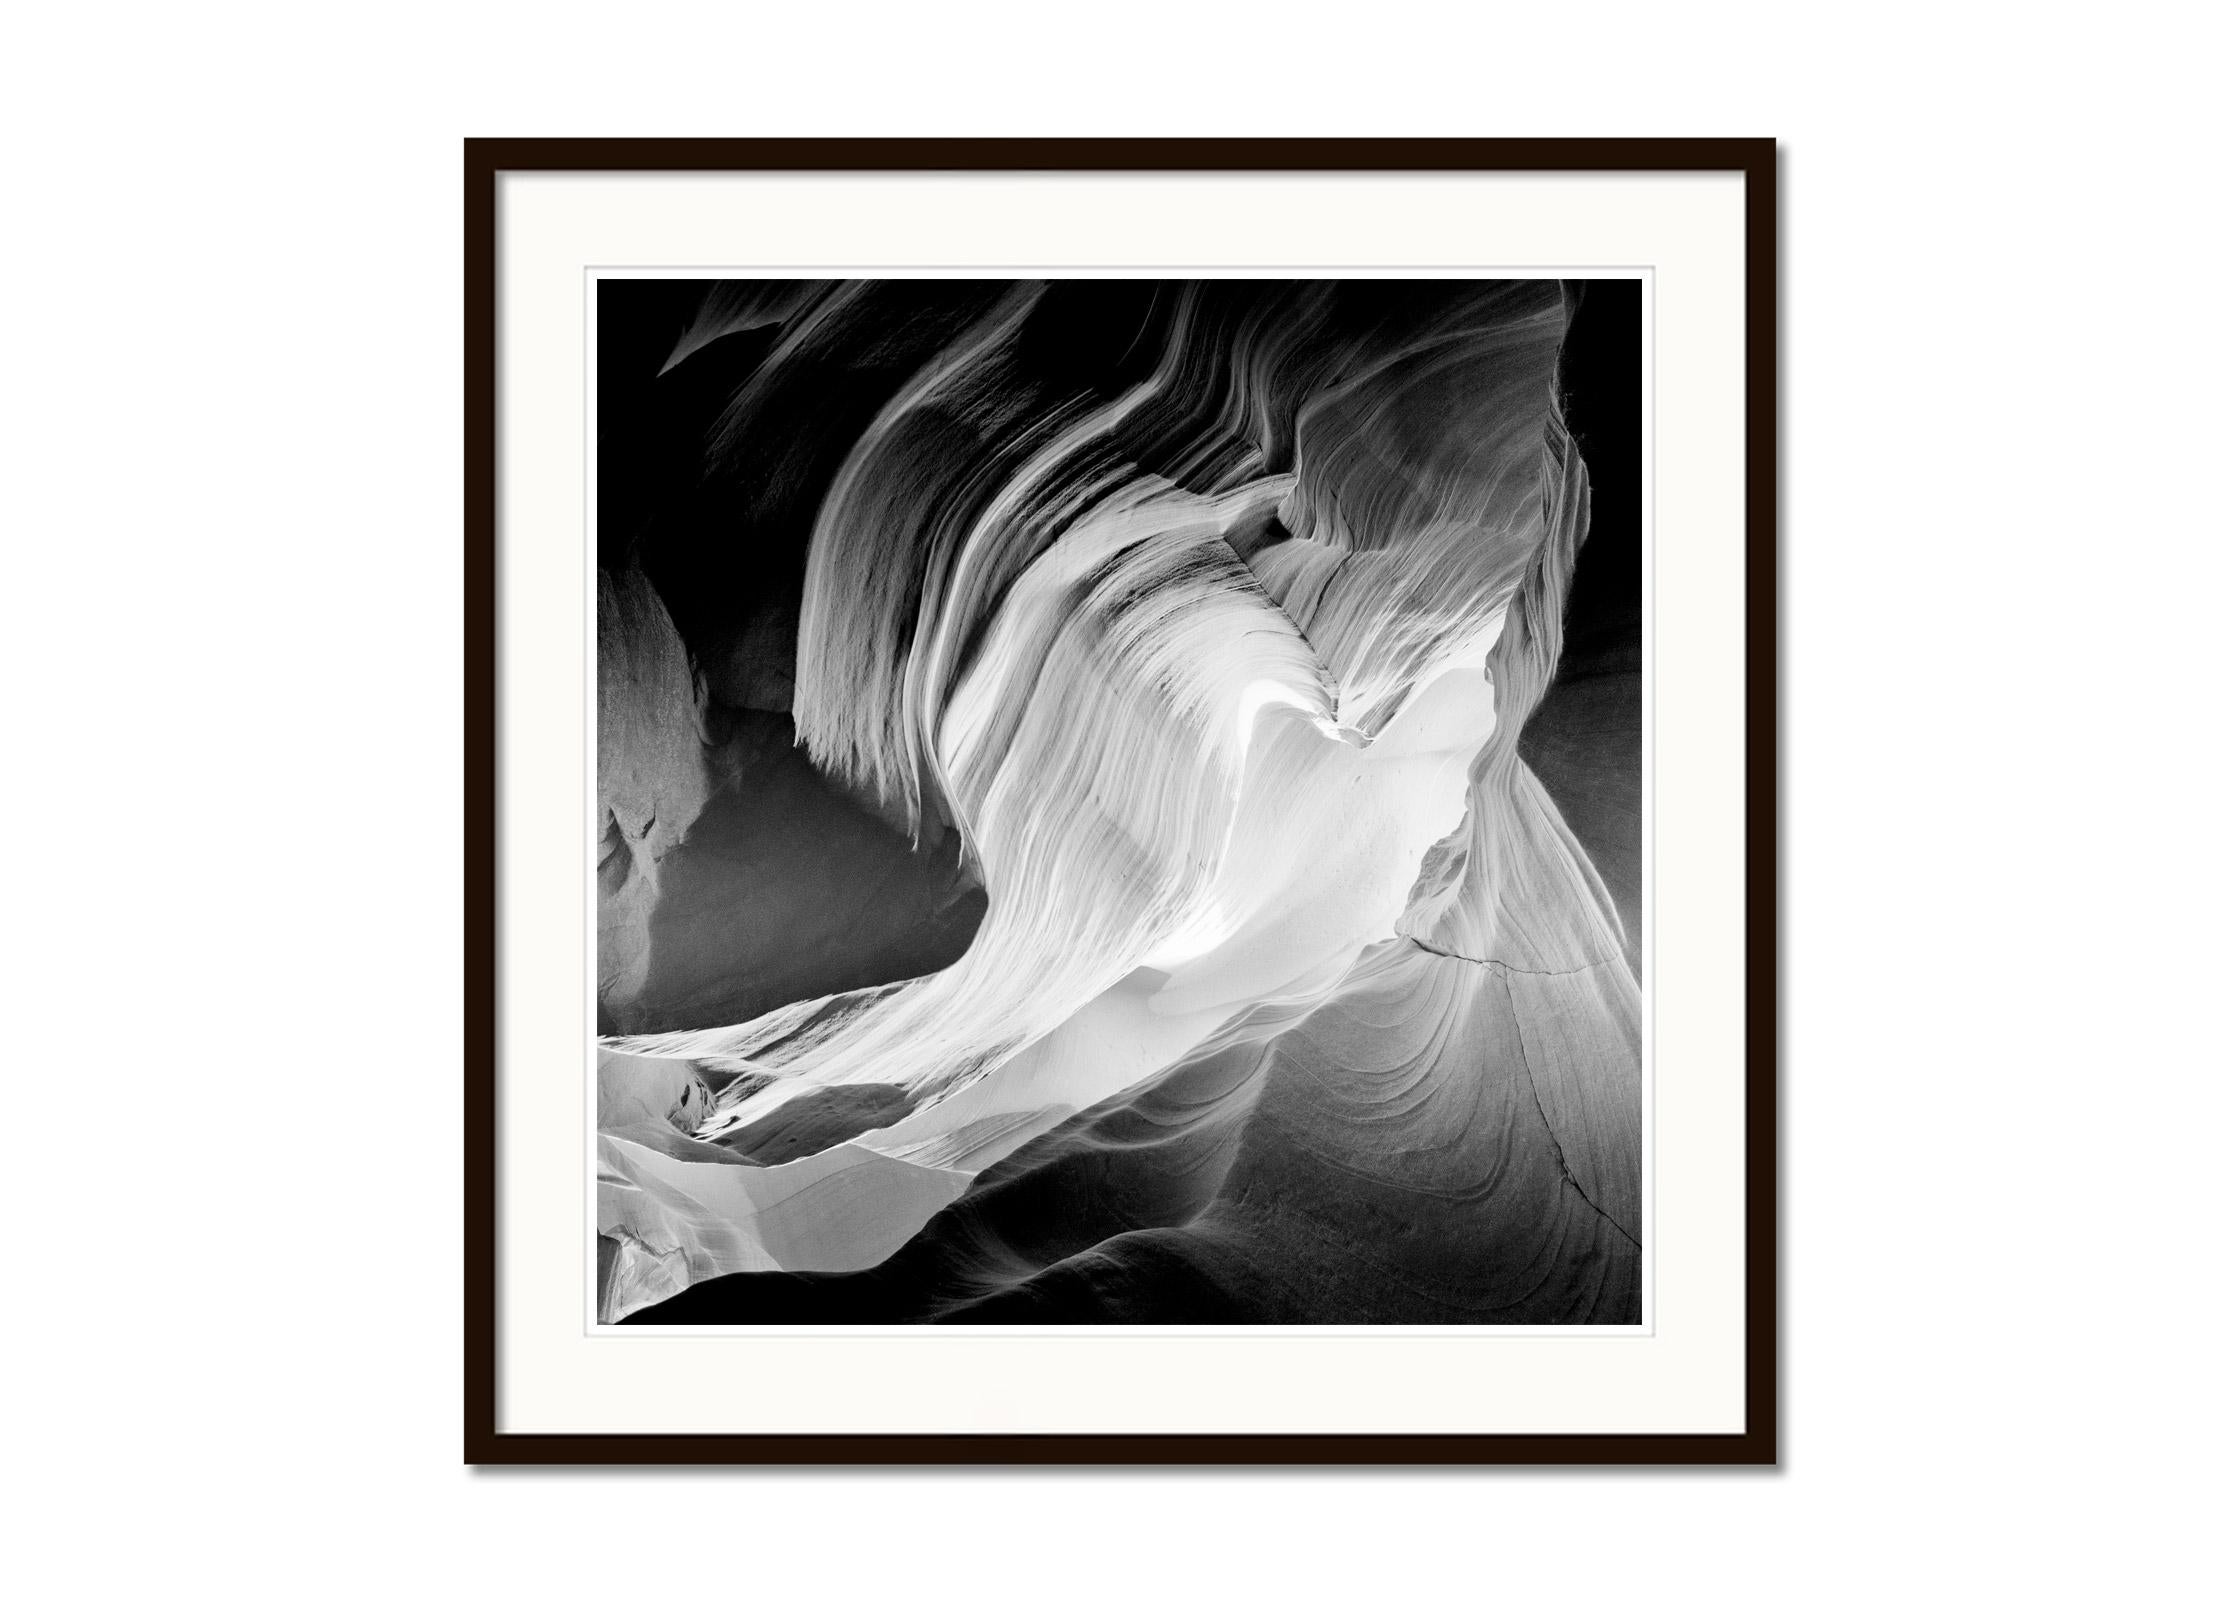 Black and white fine art landscape photography print. Heart shape detail in the impressive Antelope Canyon in Arizona, USA. Archival pigment ink print, edition of 9. Signed, titled, dated and numbered by artist. Certificate of authenticity included.